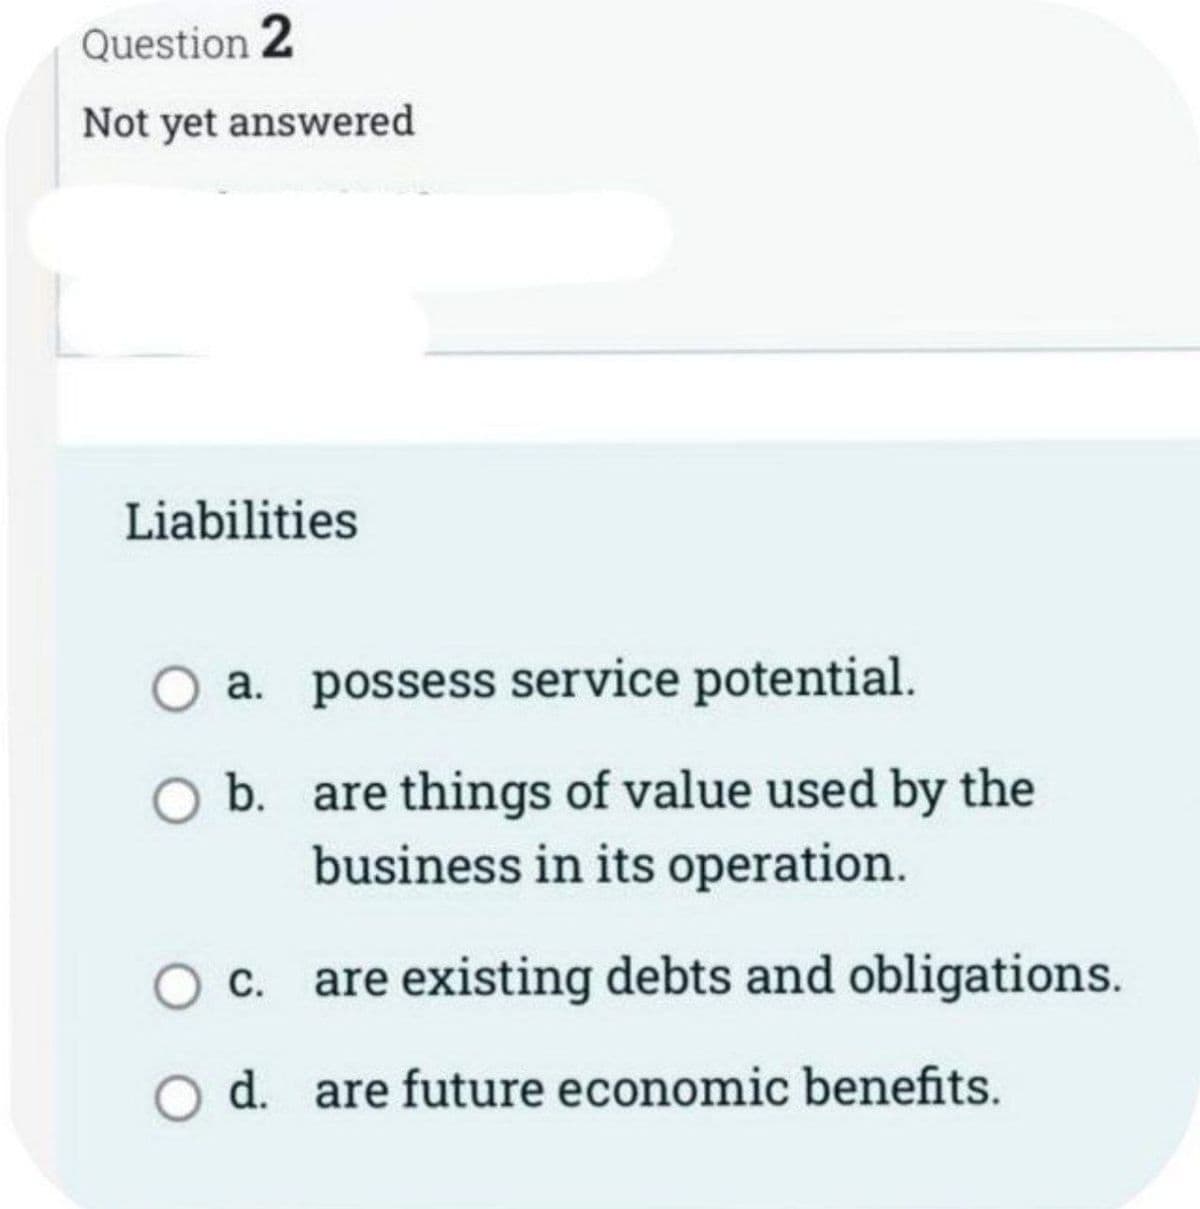 Question 2
Not yet answered
Liabilities
O a.
O b.
C.
possess service potential.
are things of value used by the
business in its operation.
are existing debts and obligations.
O d. are future economic benefits.